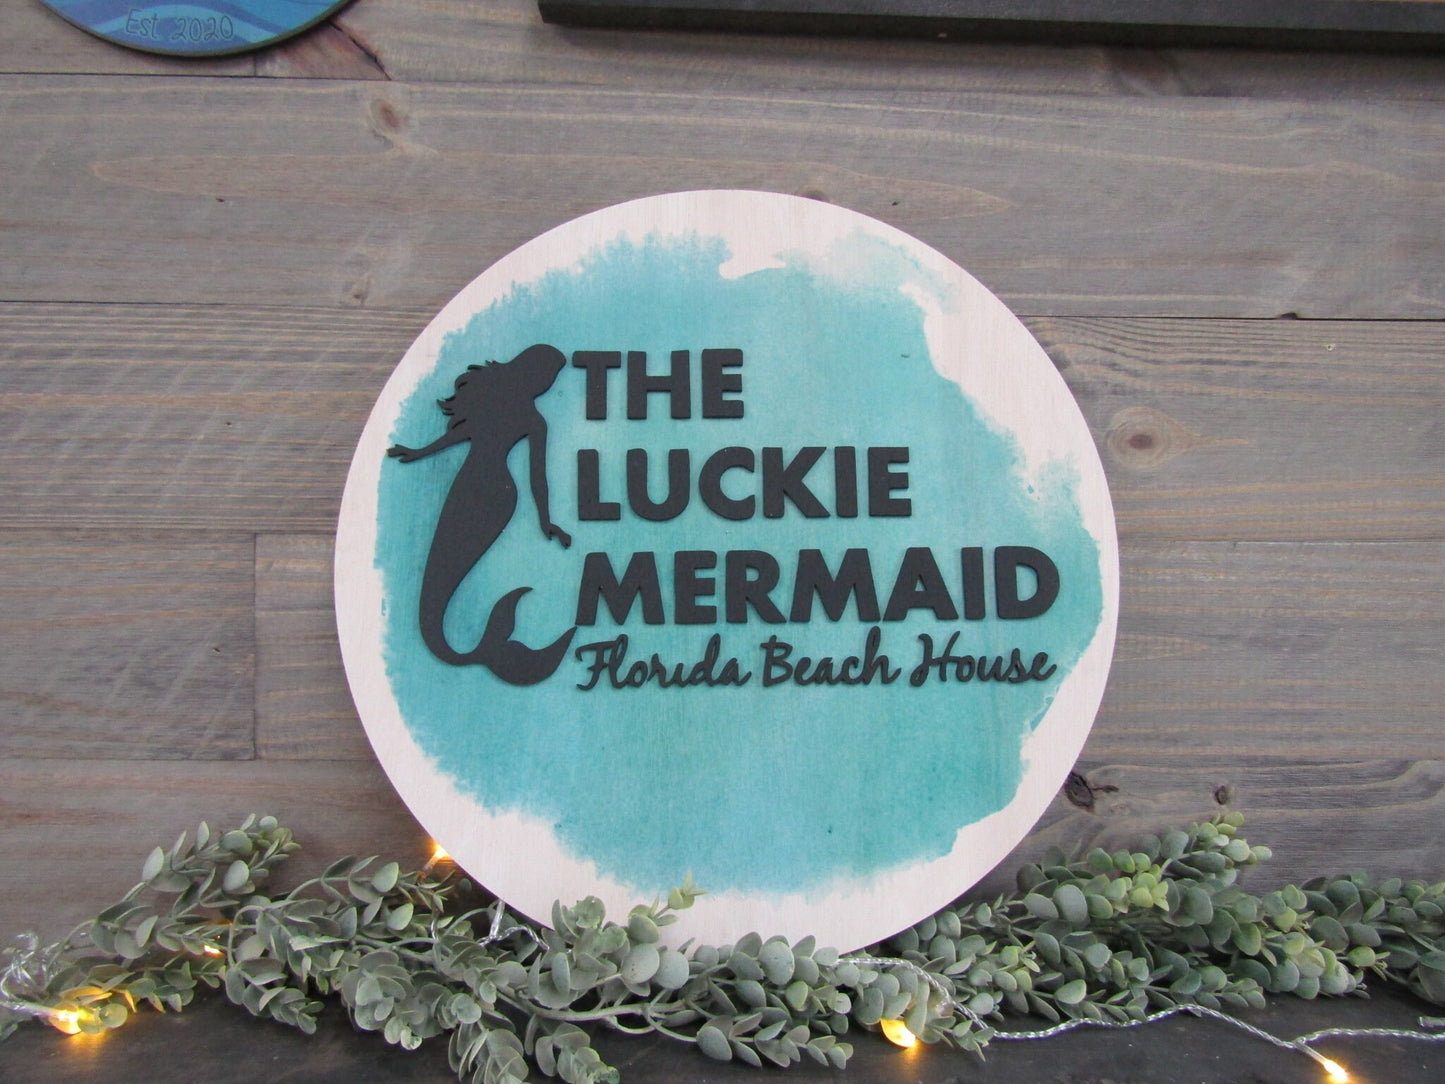 Custom Sign Round Business Commerical Signage Mermaid Mint Made to Order Co Store Front Beach House Small Shop Logo Circle Wooden Handmade